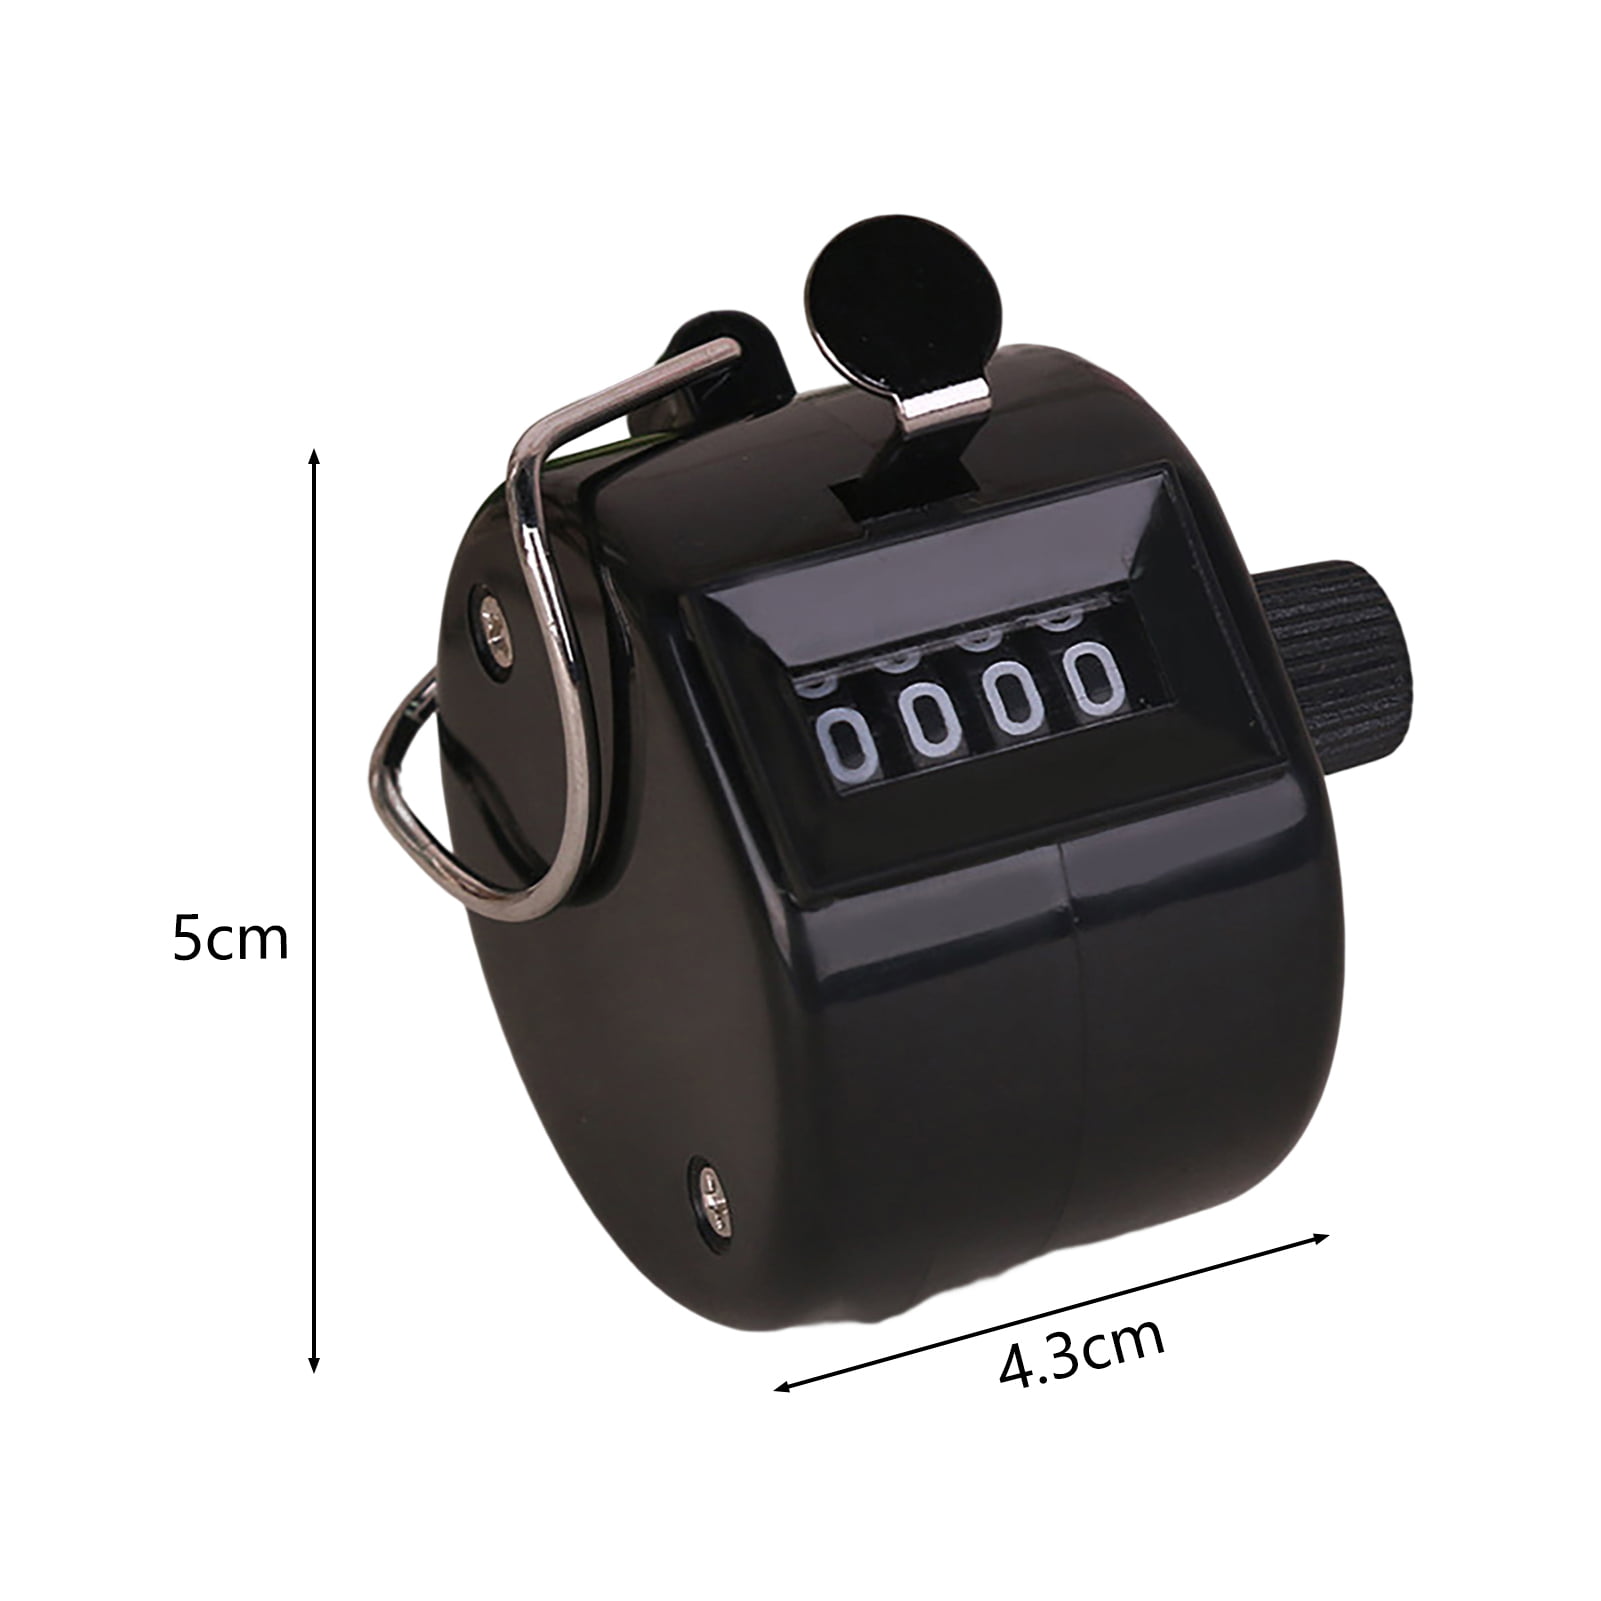 KSZNZB Hand Tally Counter,4 Digit Display Clicker Counter Metal Mechanical  Handheld Pitch Counter Clicker with Finger Ring for Row Sport Coach School